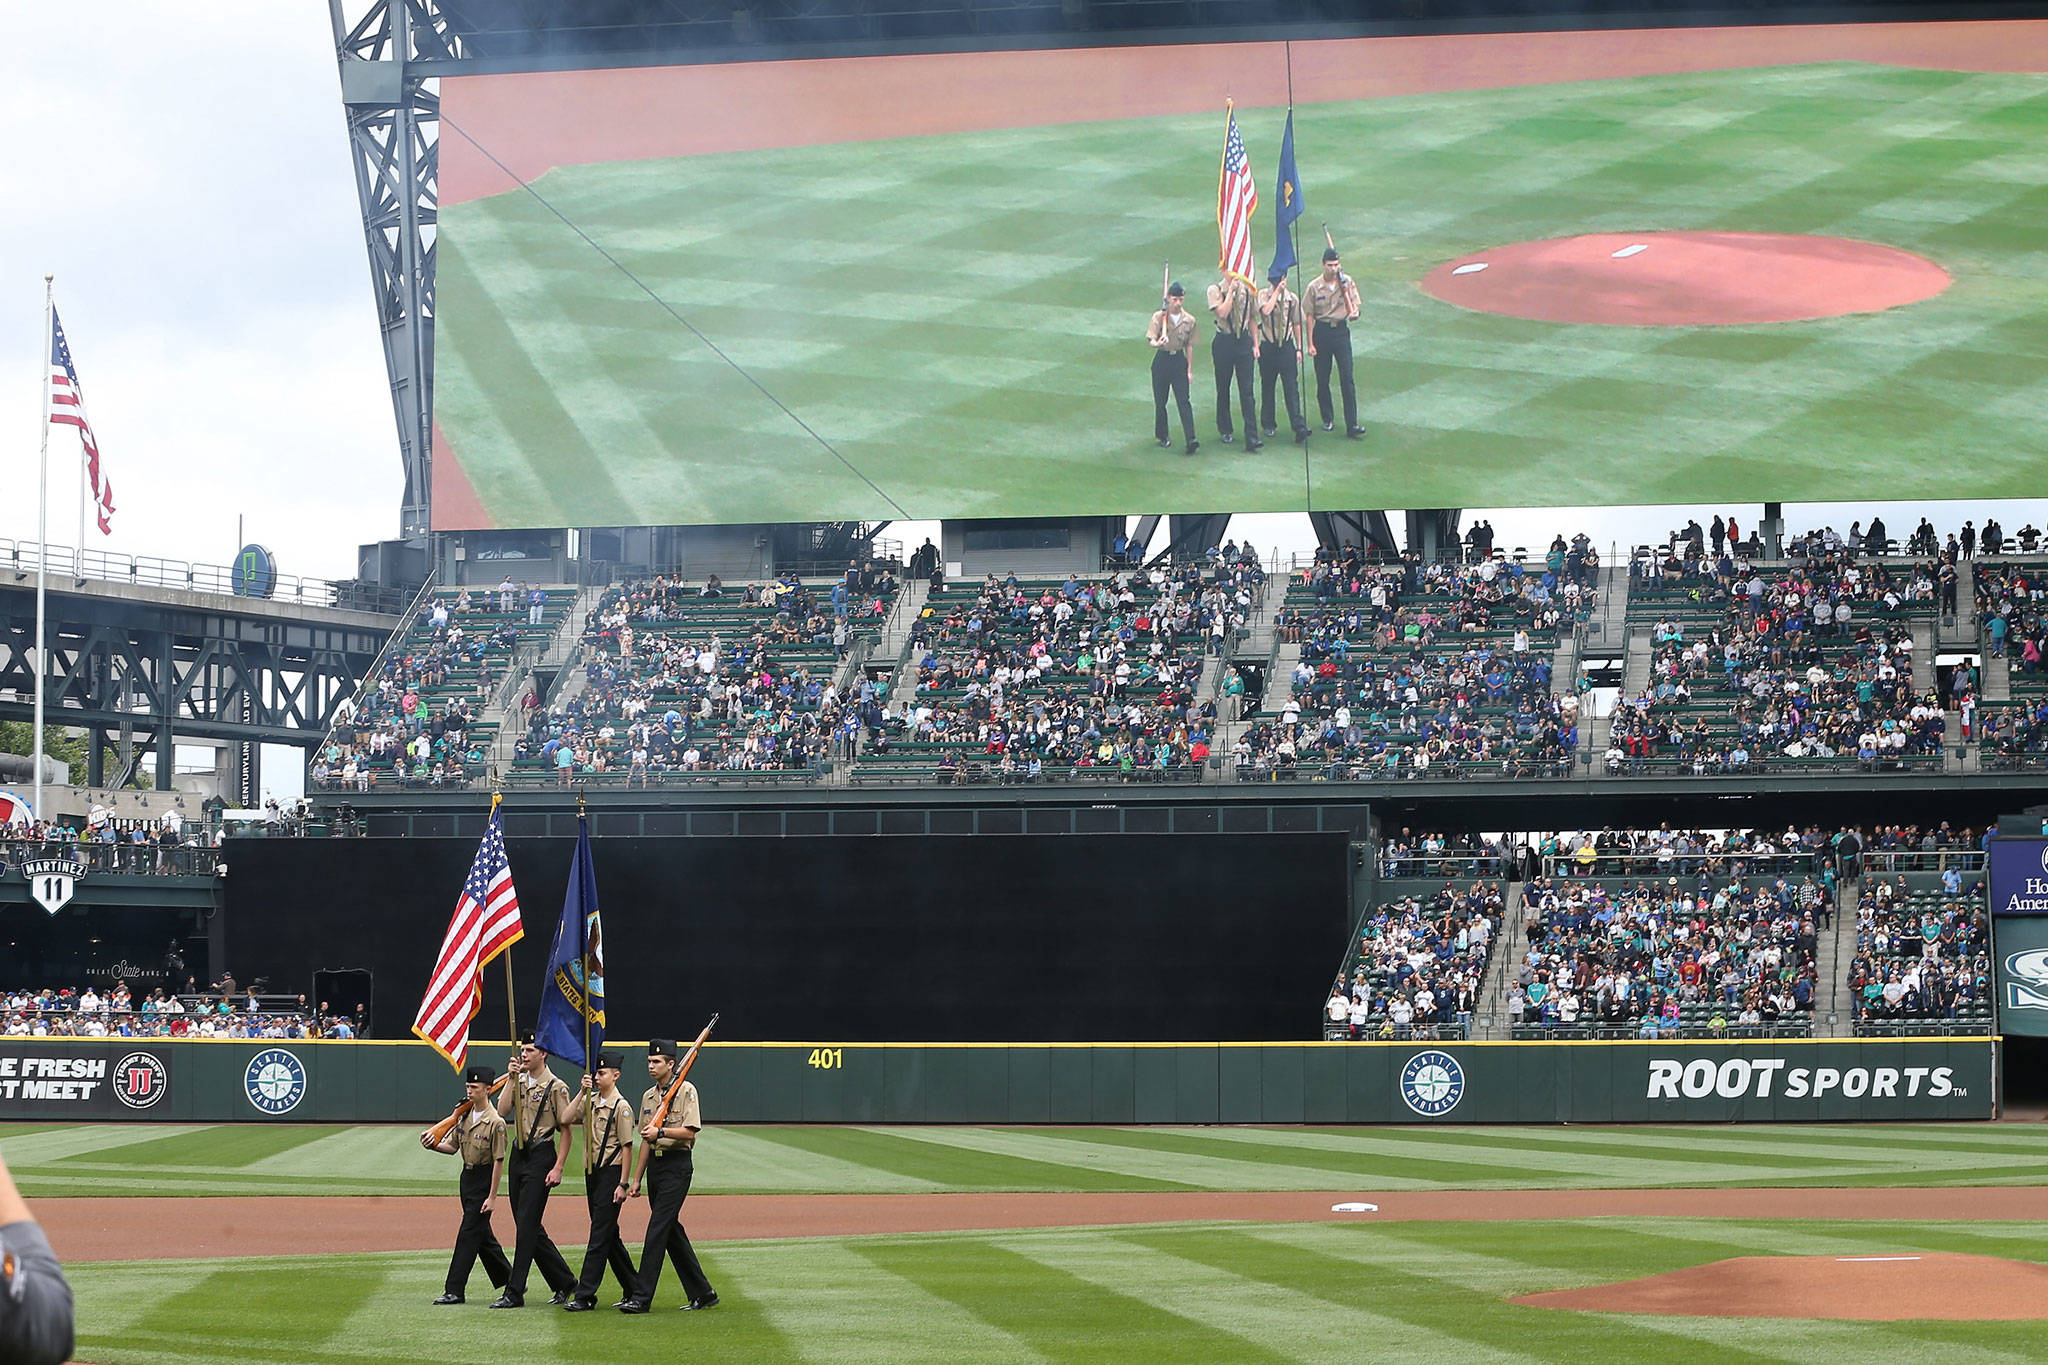 The Oak Harbor High School color guard is displayed on the video screen at Safeco Field Sunday. (Photo by John Fisken)